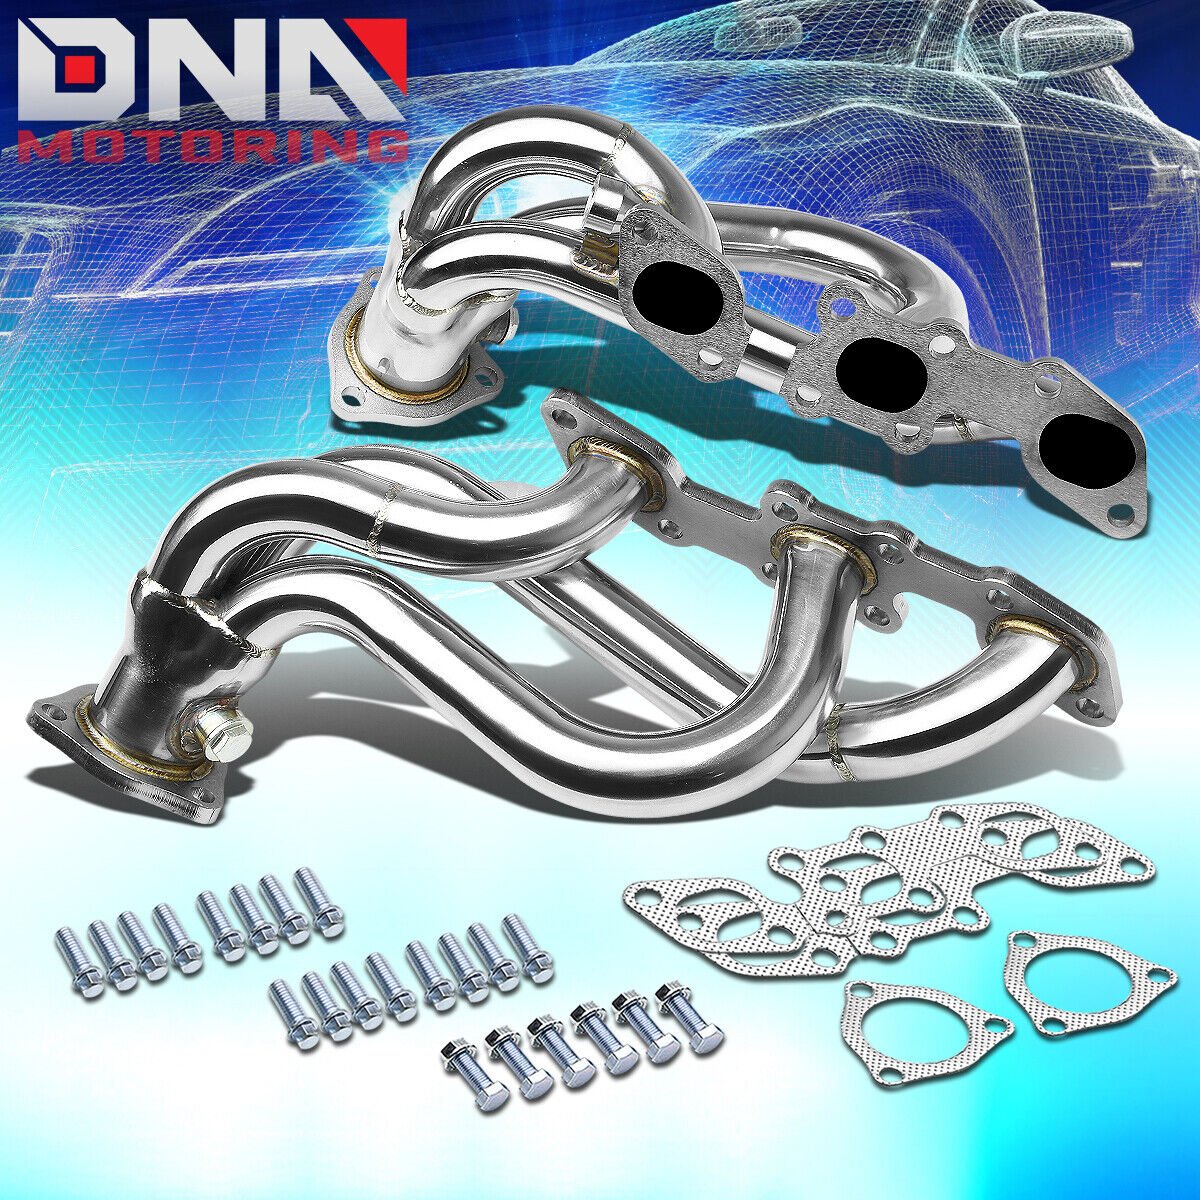 STAINLESS STEEL HEADER FOR 90-96 300ZX FAIRLADY Z V6 NON-TURBO EXHAUST/MANIFOLD